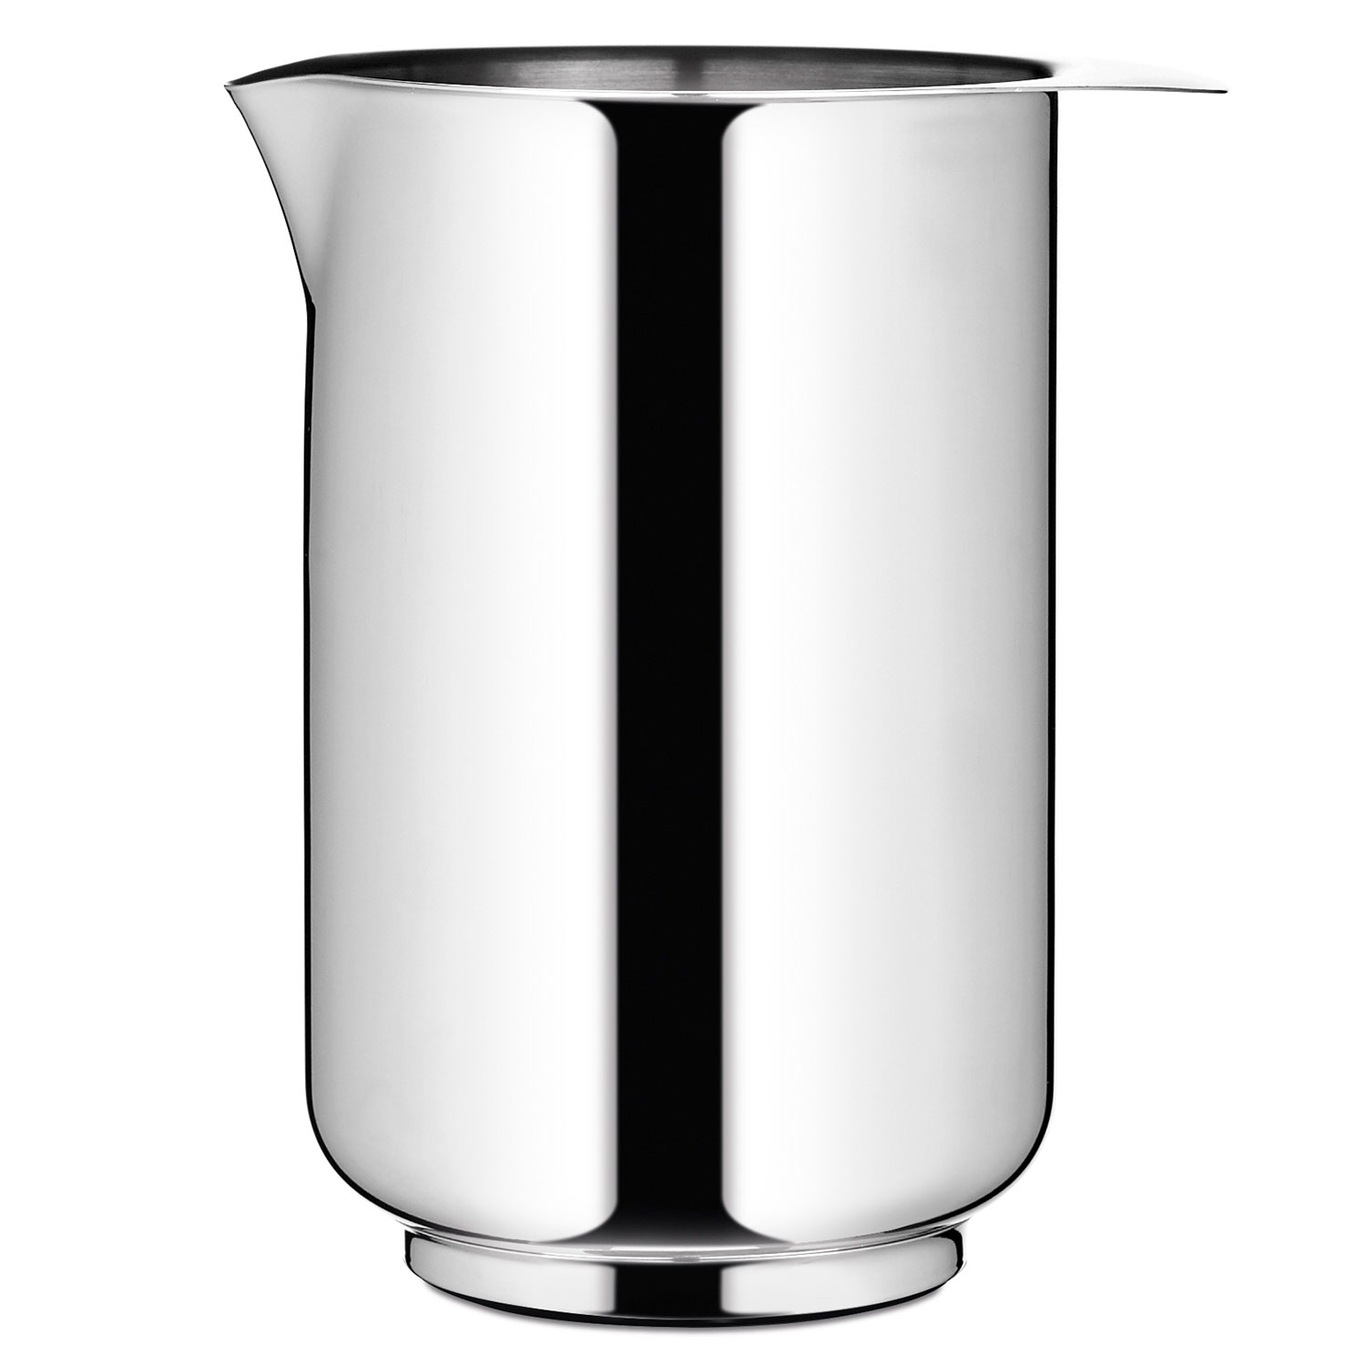 Mixing Jug 1 L, Stainless Steel